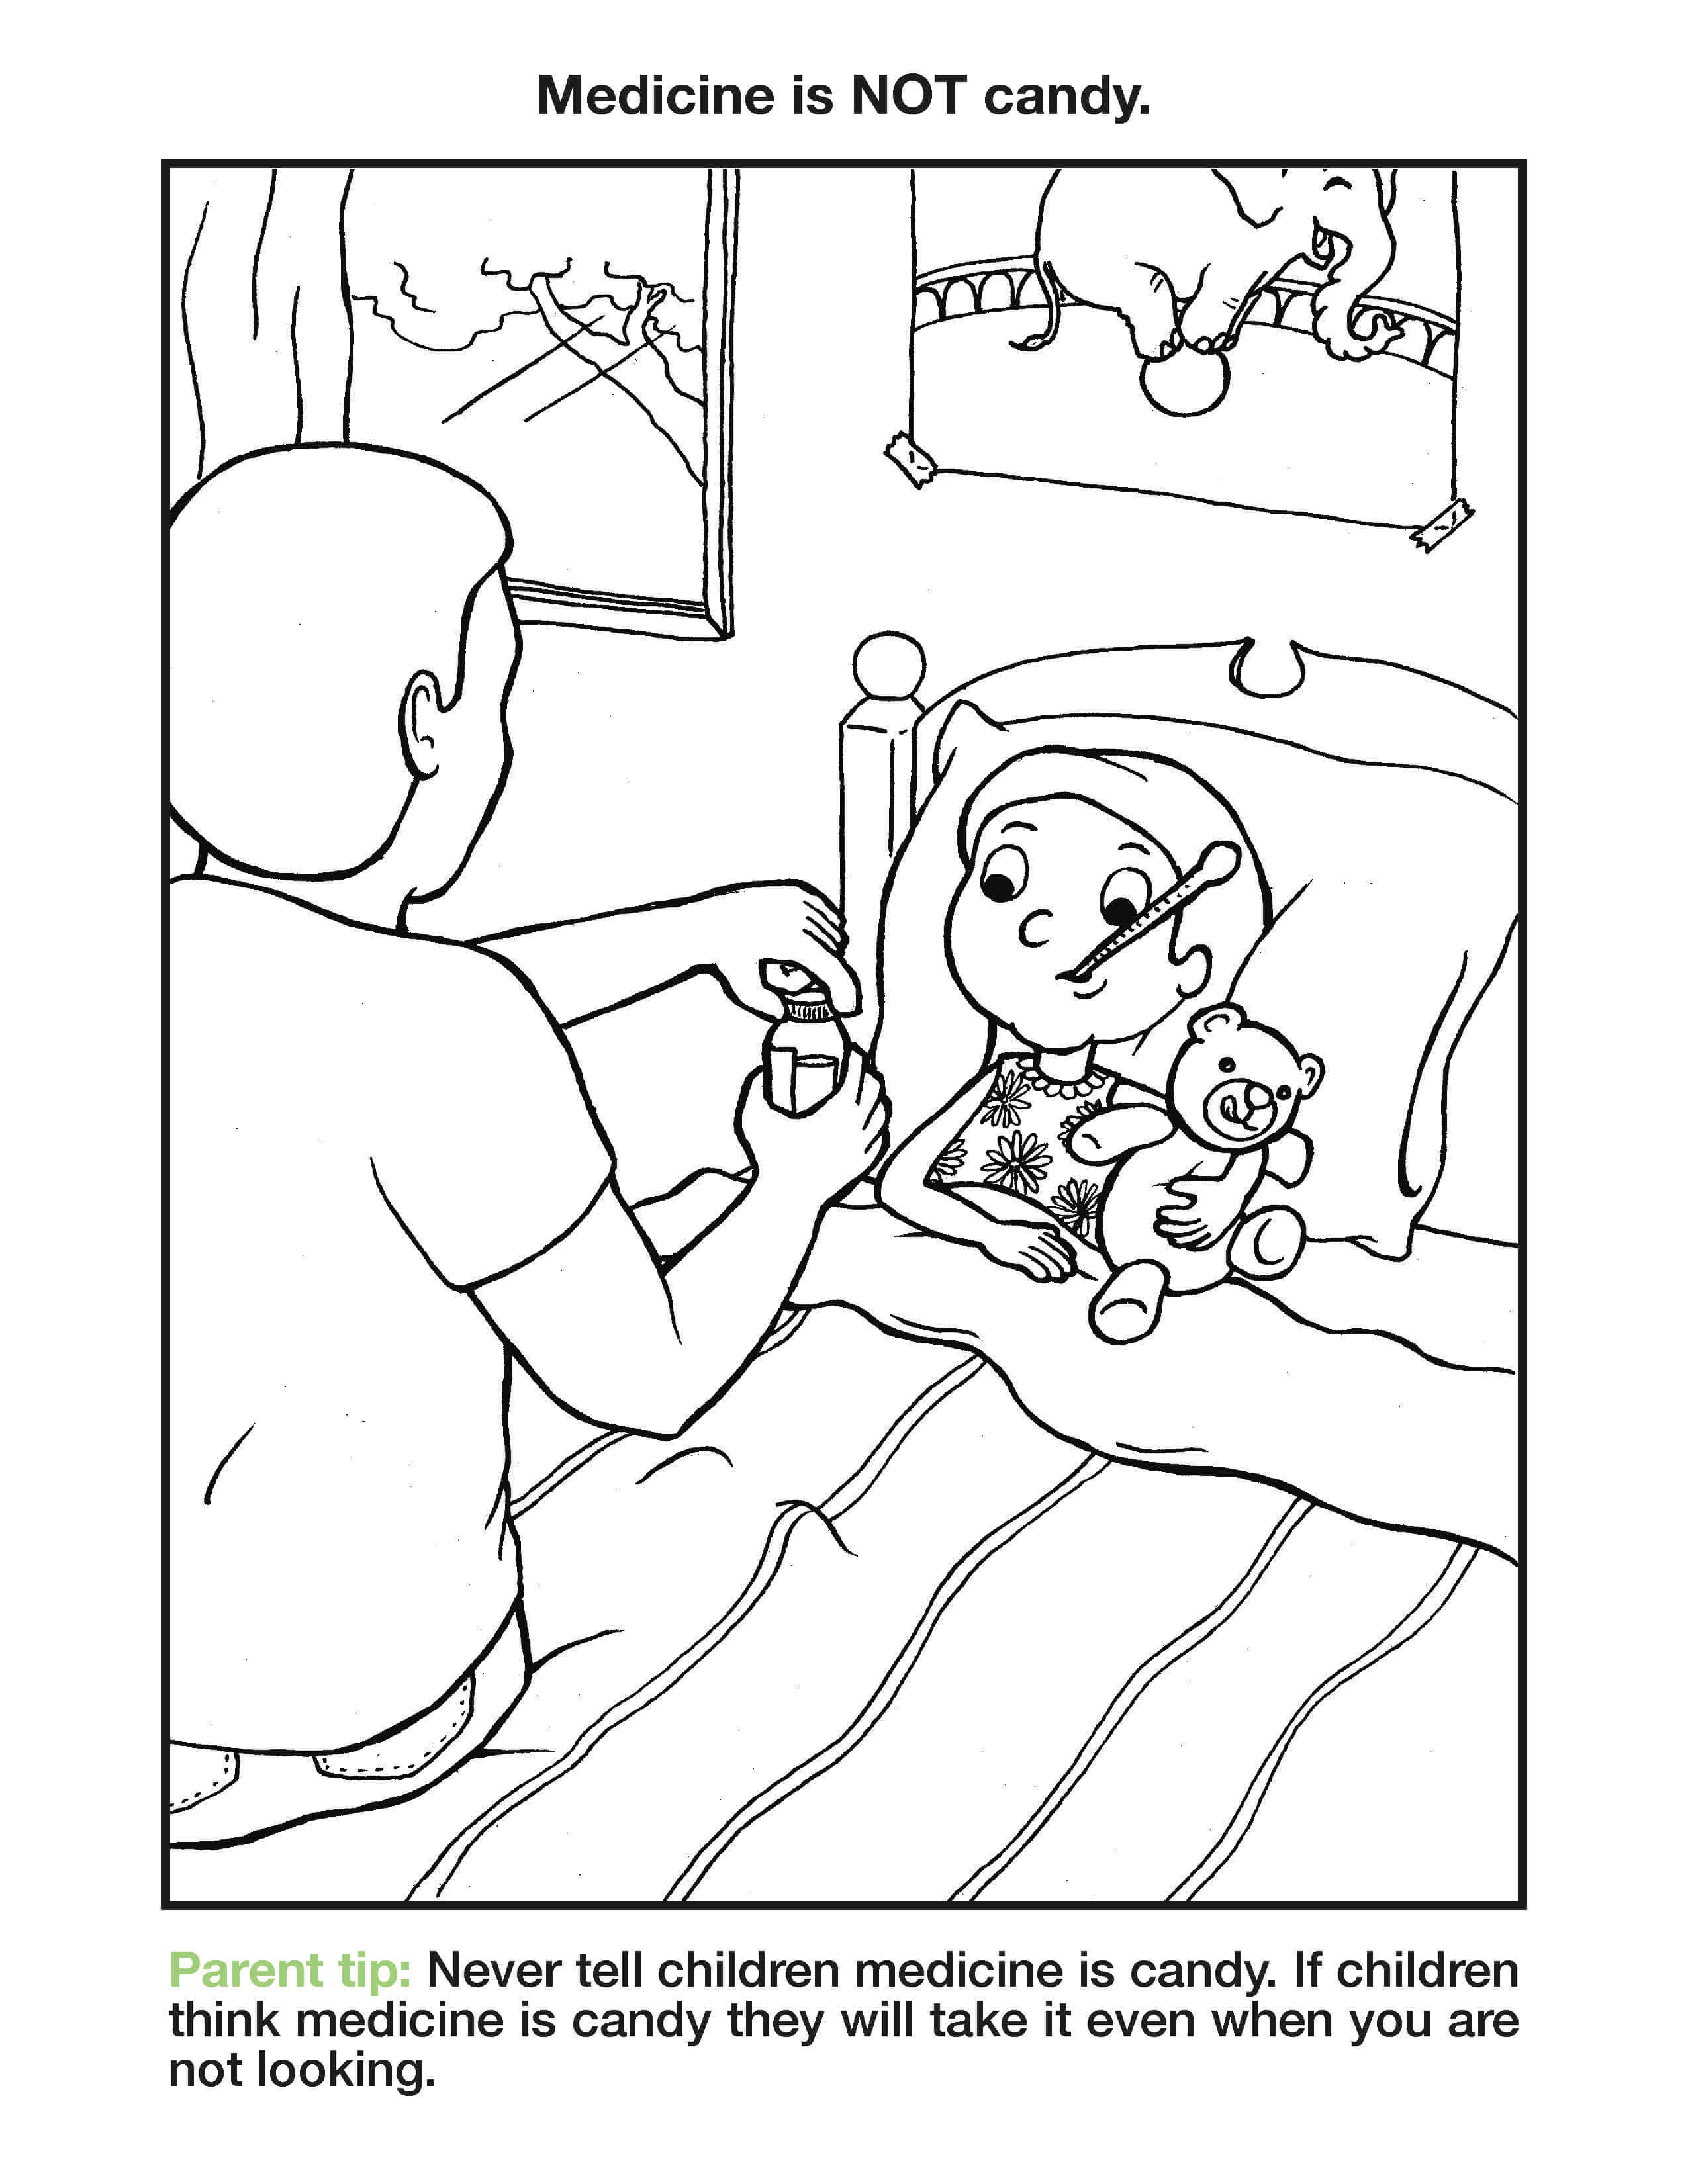 Medicine Safety Coloring Pages - Up and ...upandaway.org